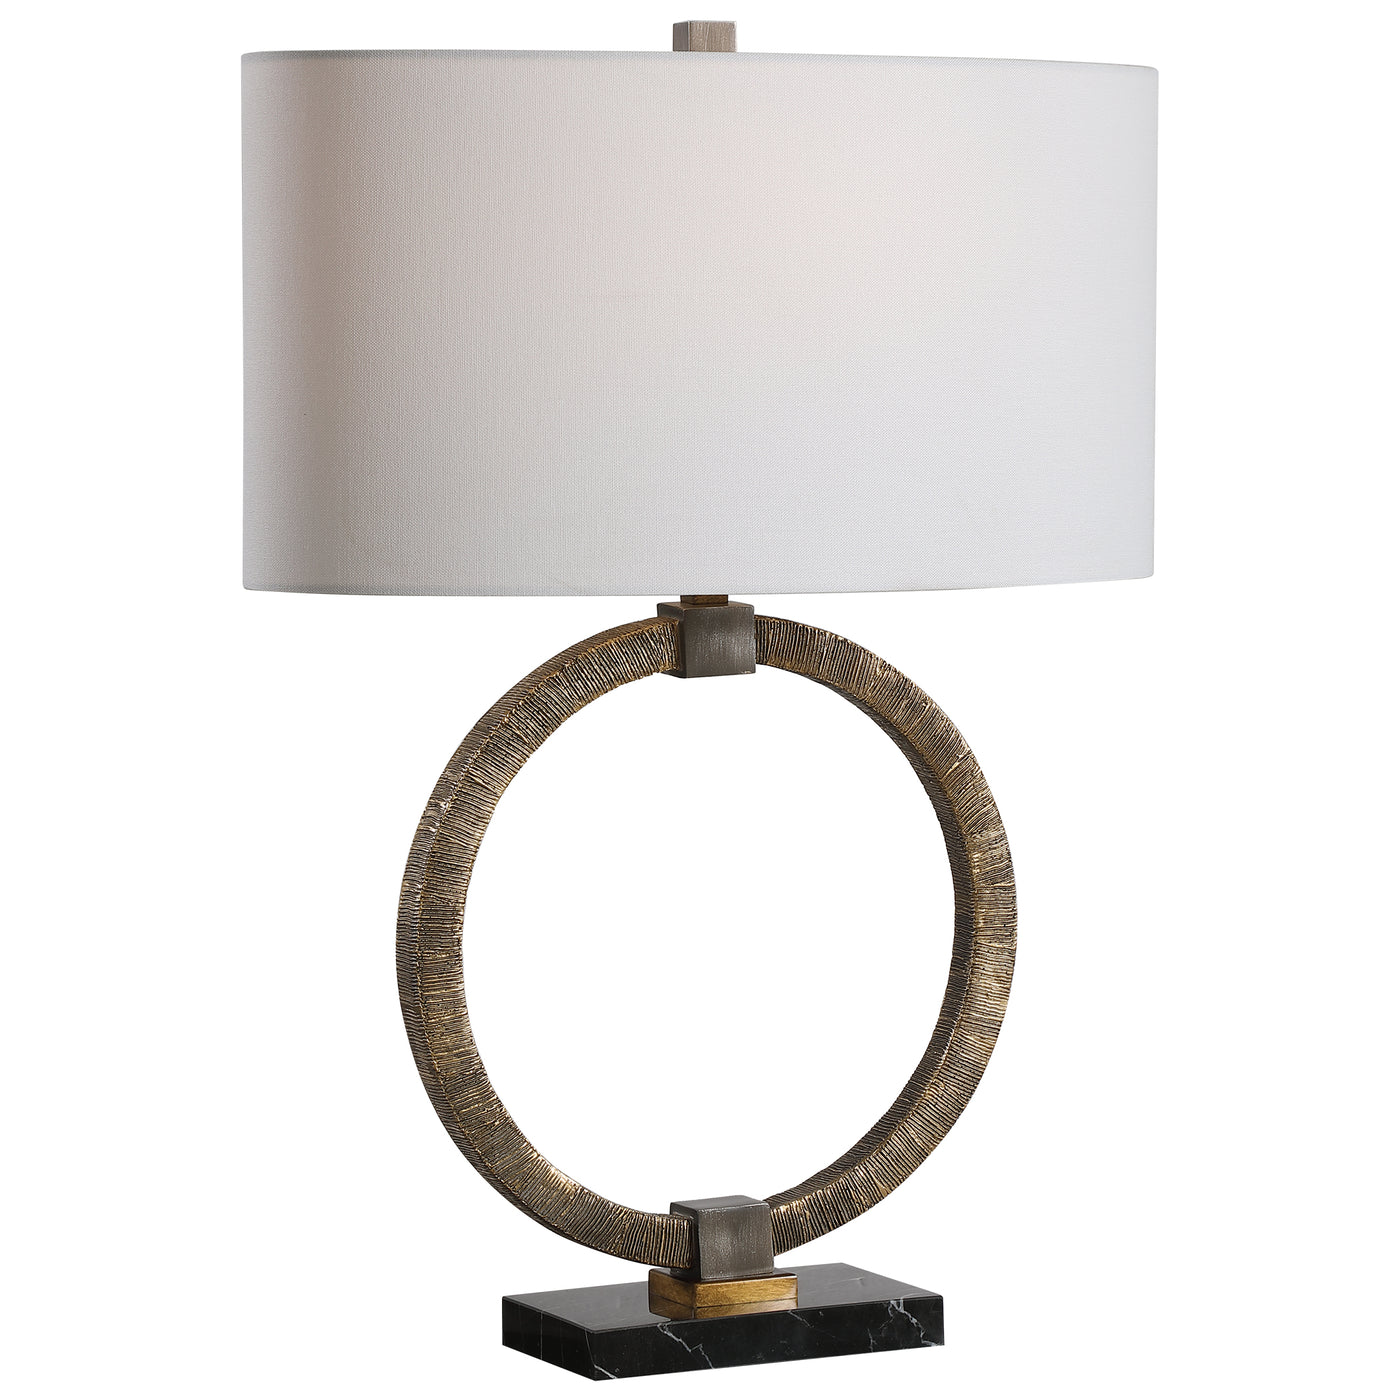 Inspired By Tribal And Bohemian Styles, This Table Lamp Features A Heavily Antiqued Gold Finish With Hand Carved Texture, ...